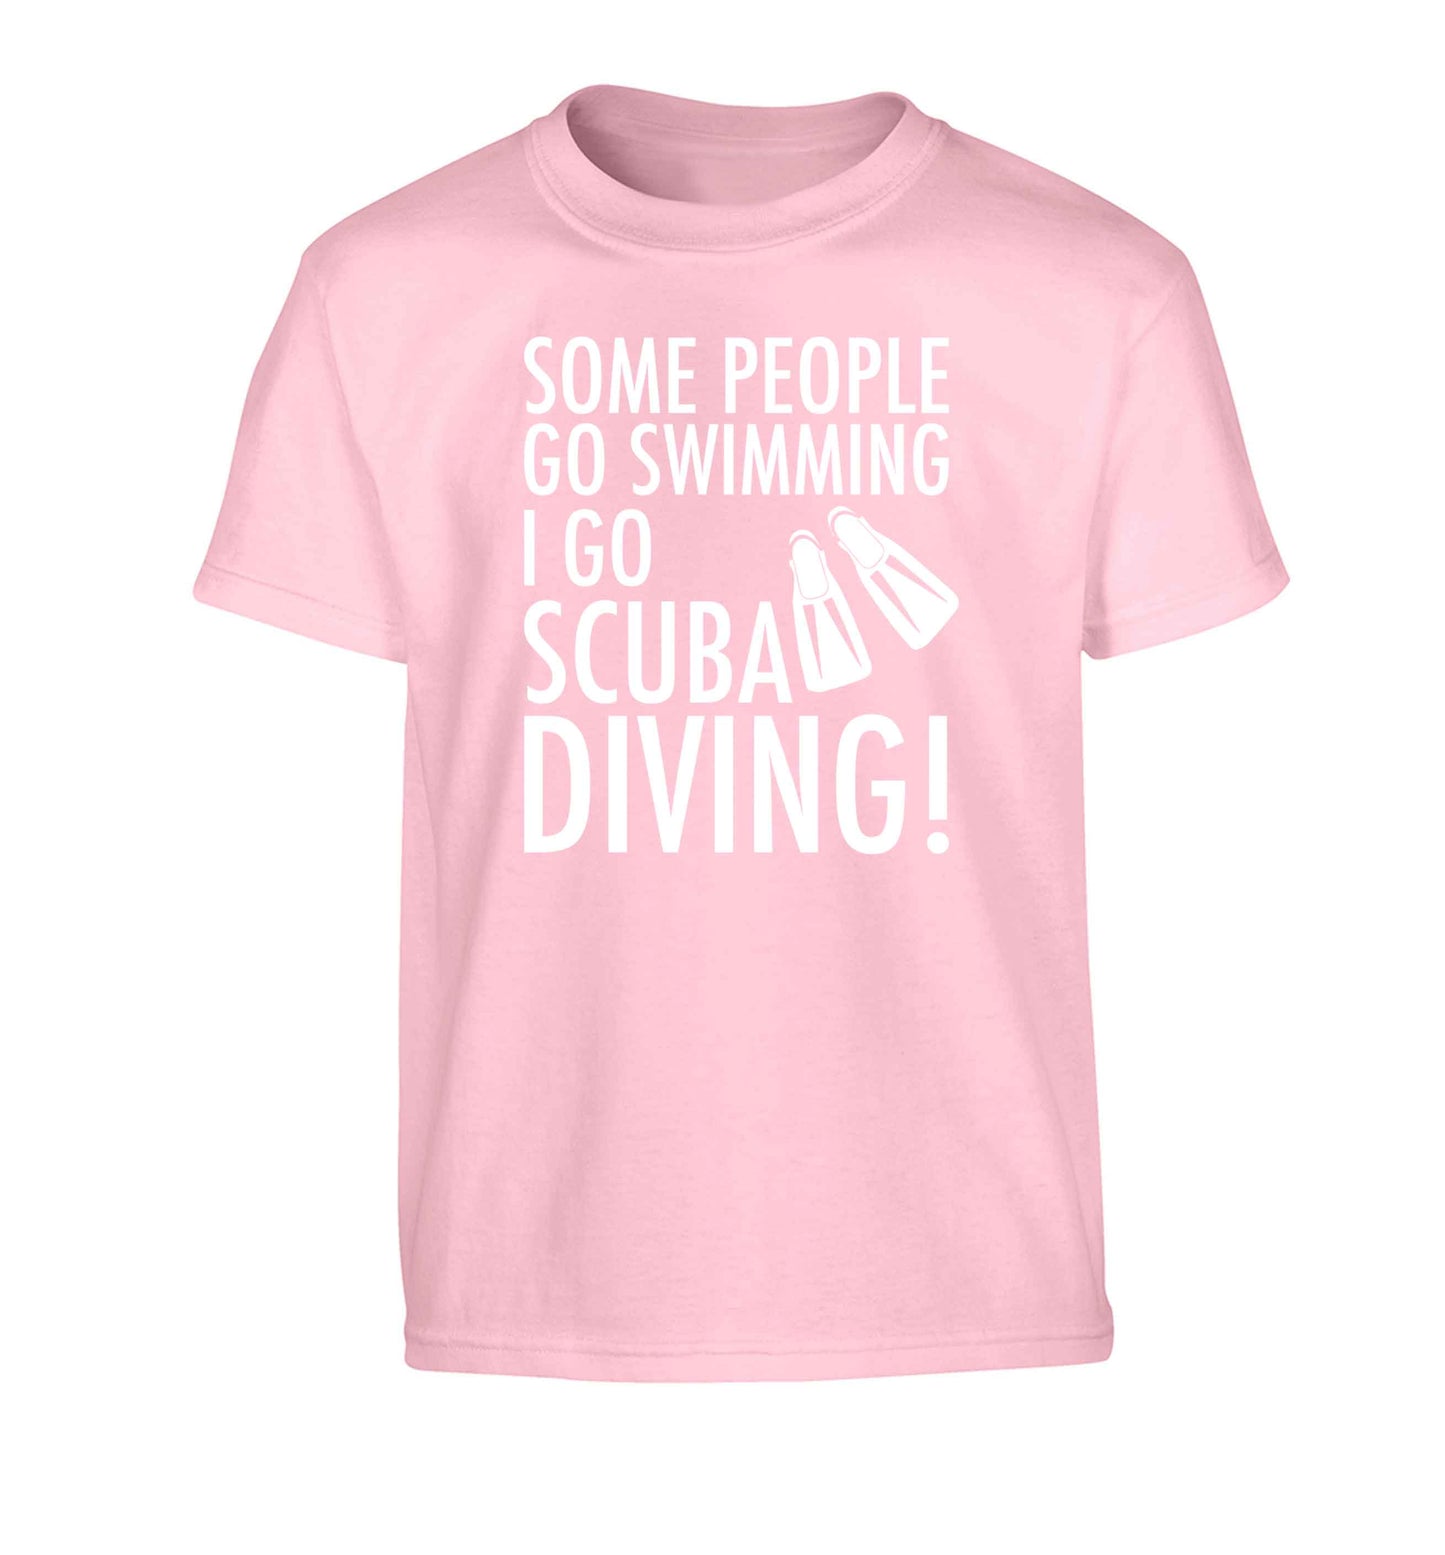 Some people go swimming I go scuba diving! Children's light pink Tshirt 12-13 Years